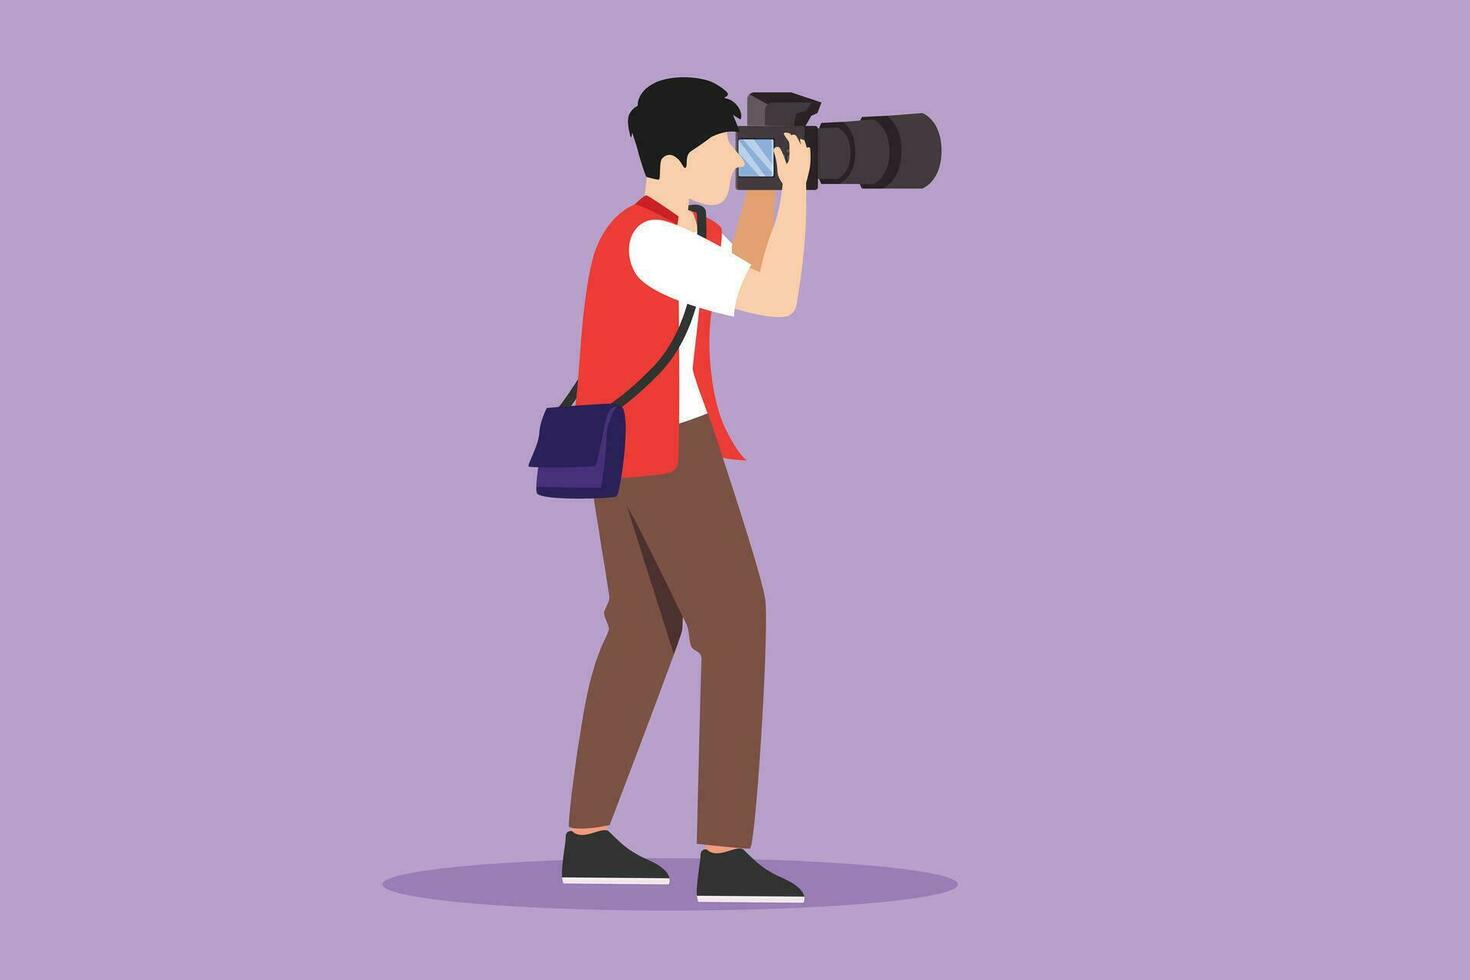 Cartoon flat style drawing side view of man photographer holding photo camera and photographing. Creative profession or occupation logo. Happy male take photo shot. Graphic design vector illustration